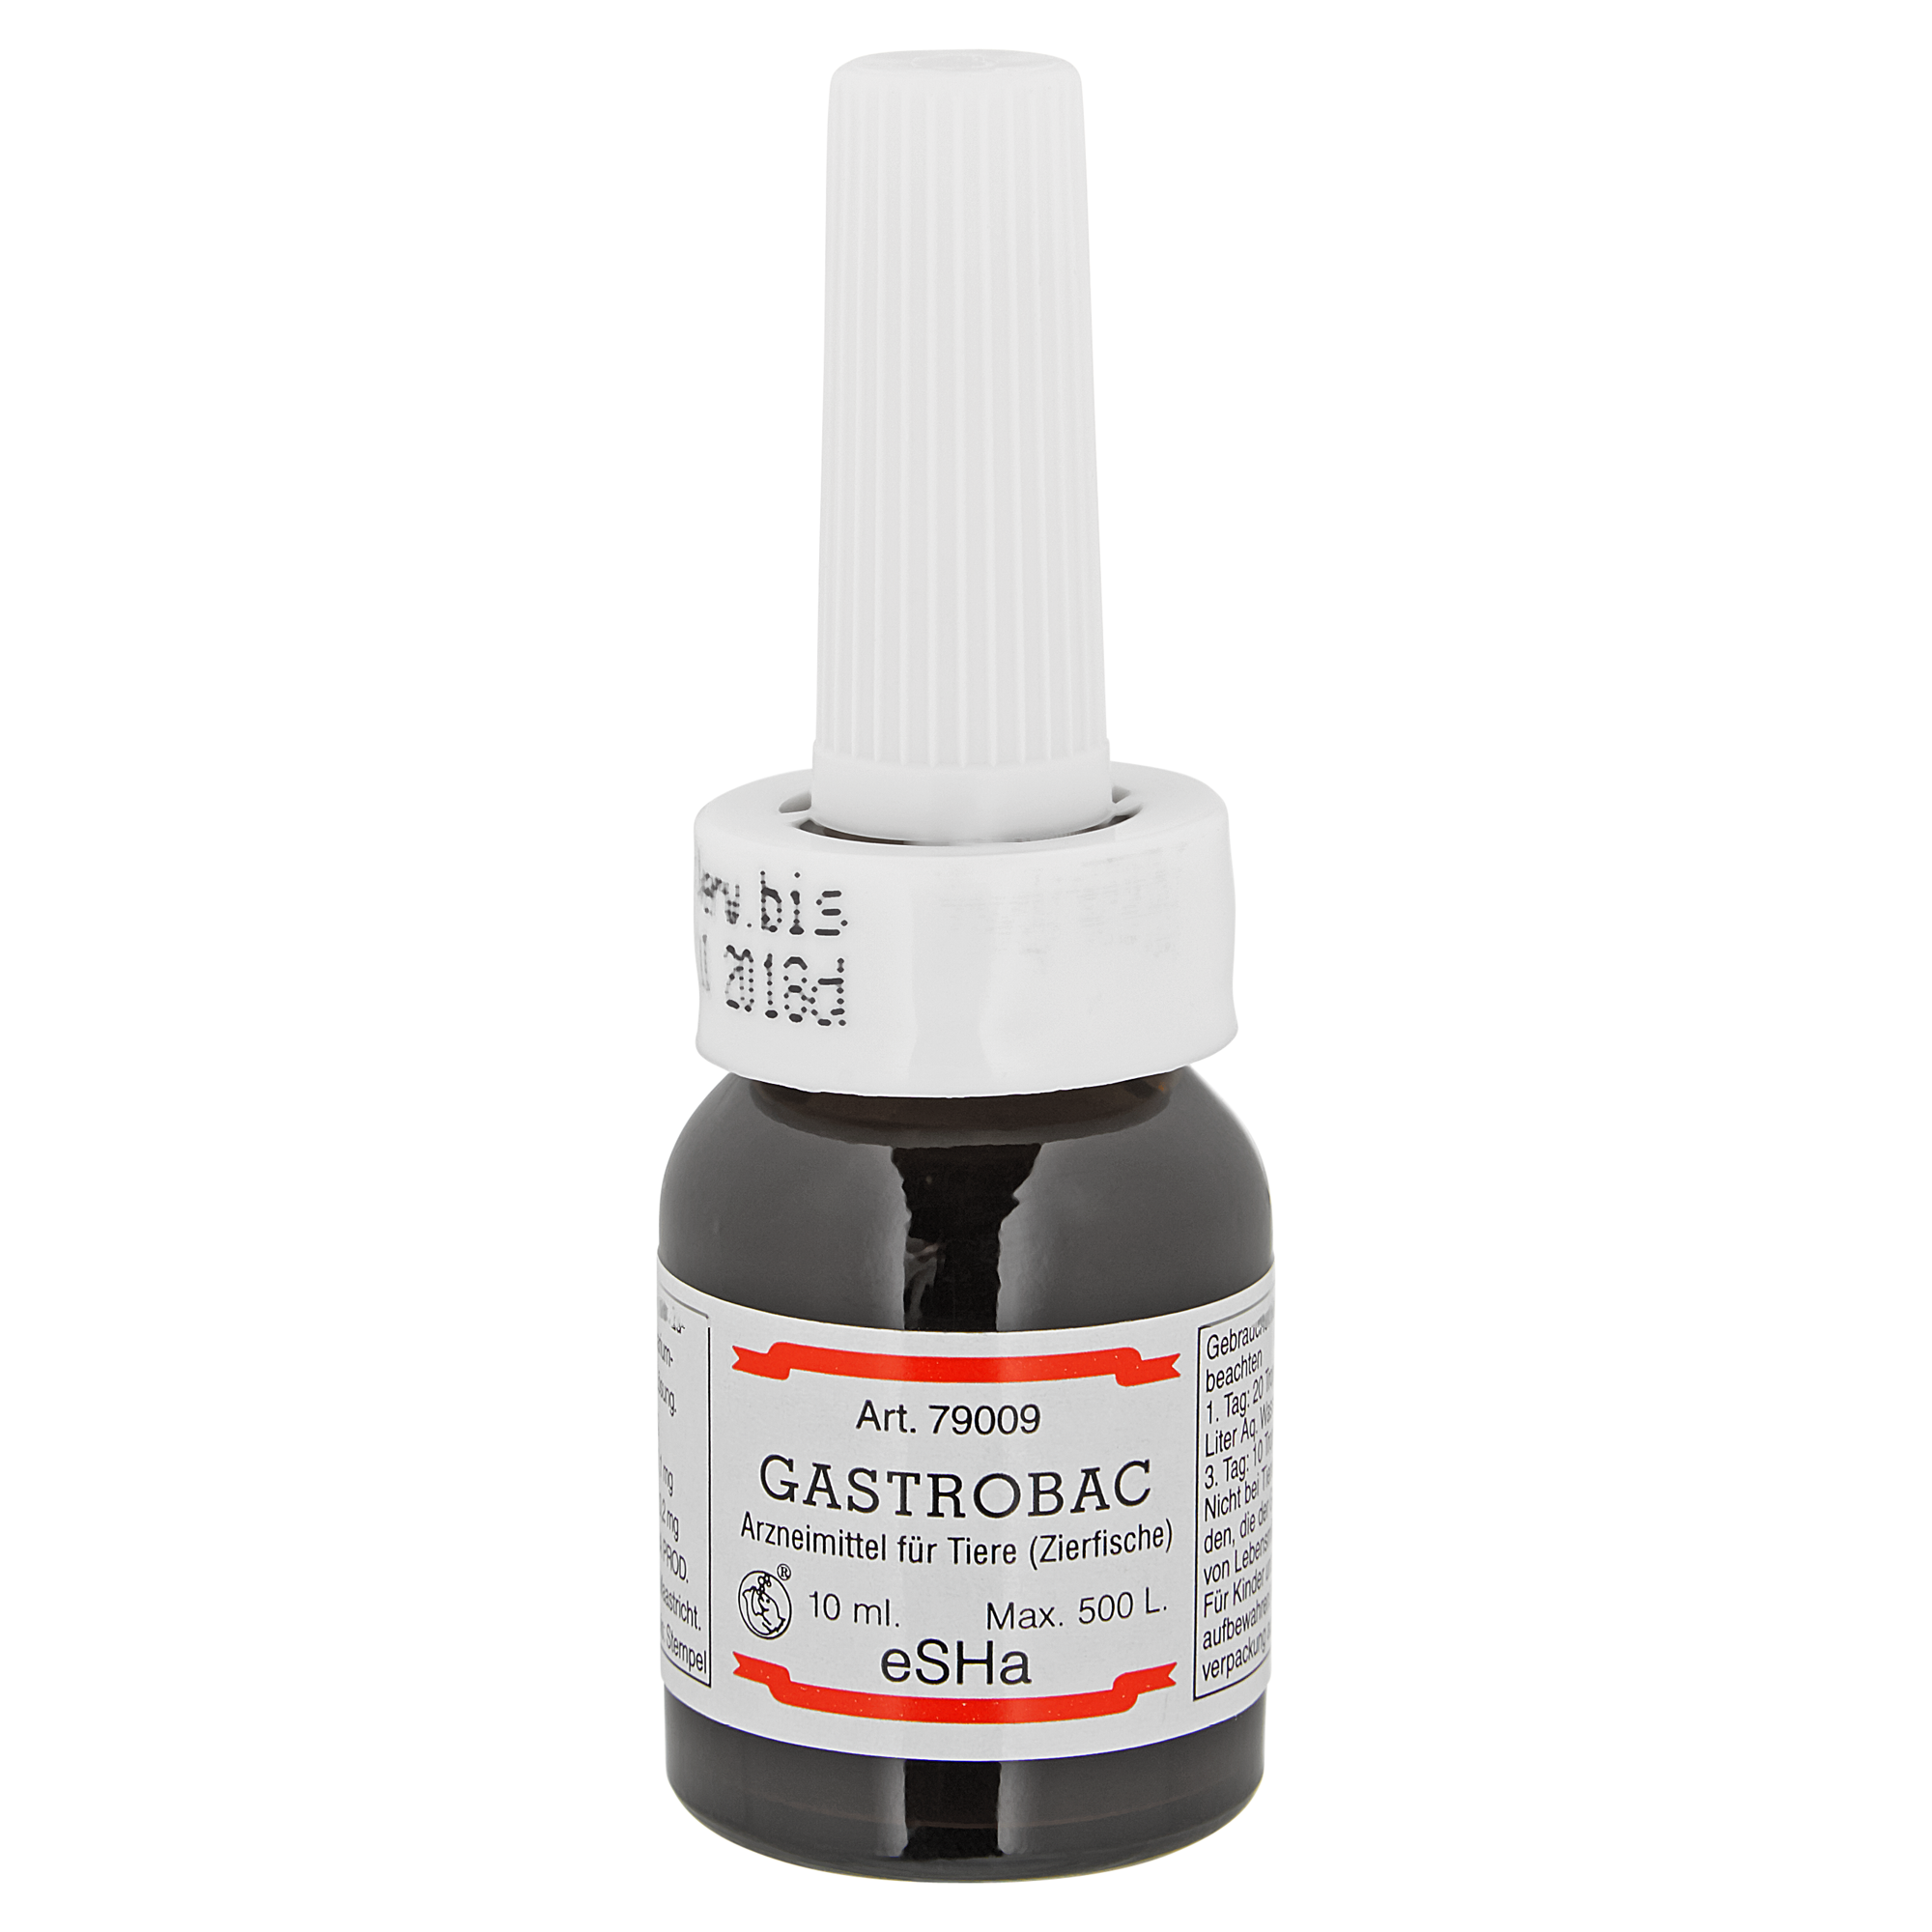 Fischarznei "Gastrobac" 10 ml + product picture